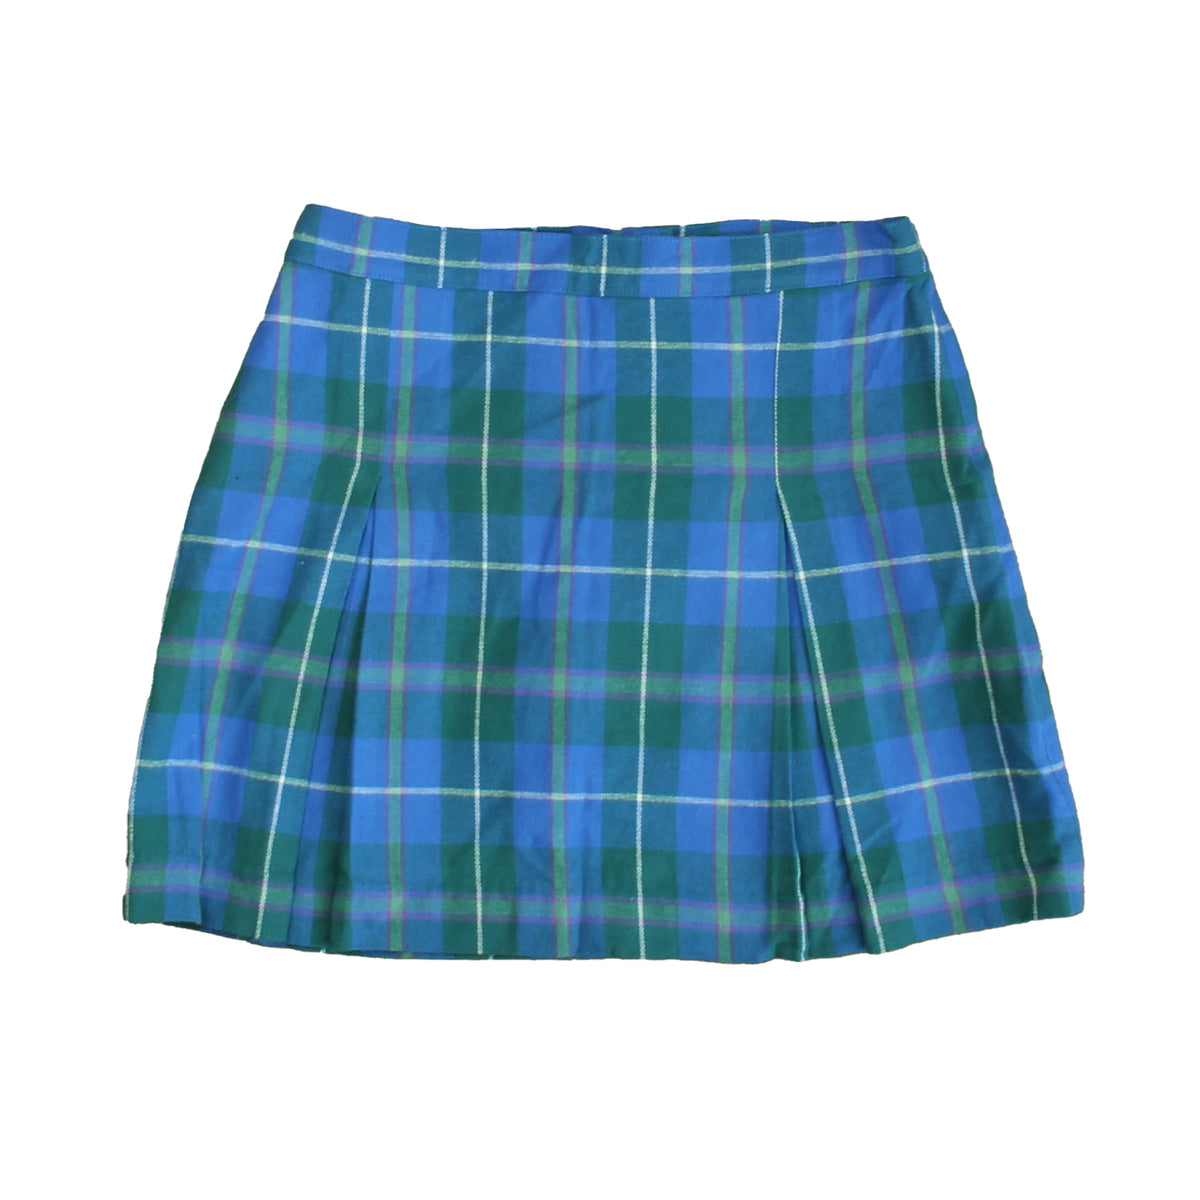 New with Tags: Rowayton Plaid Skirt size: 6-14 Years -- FINAL SALE